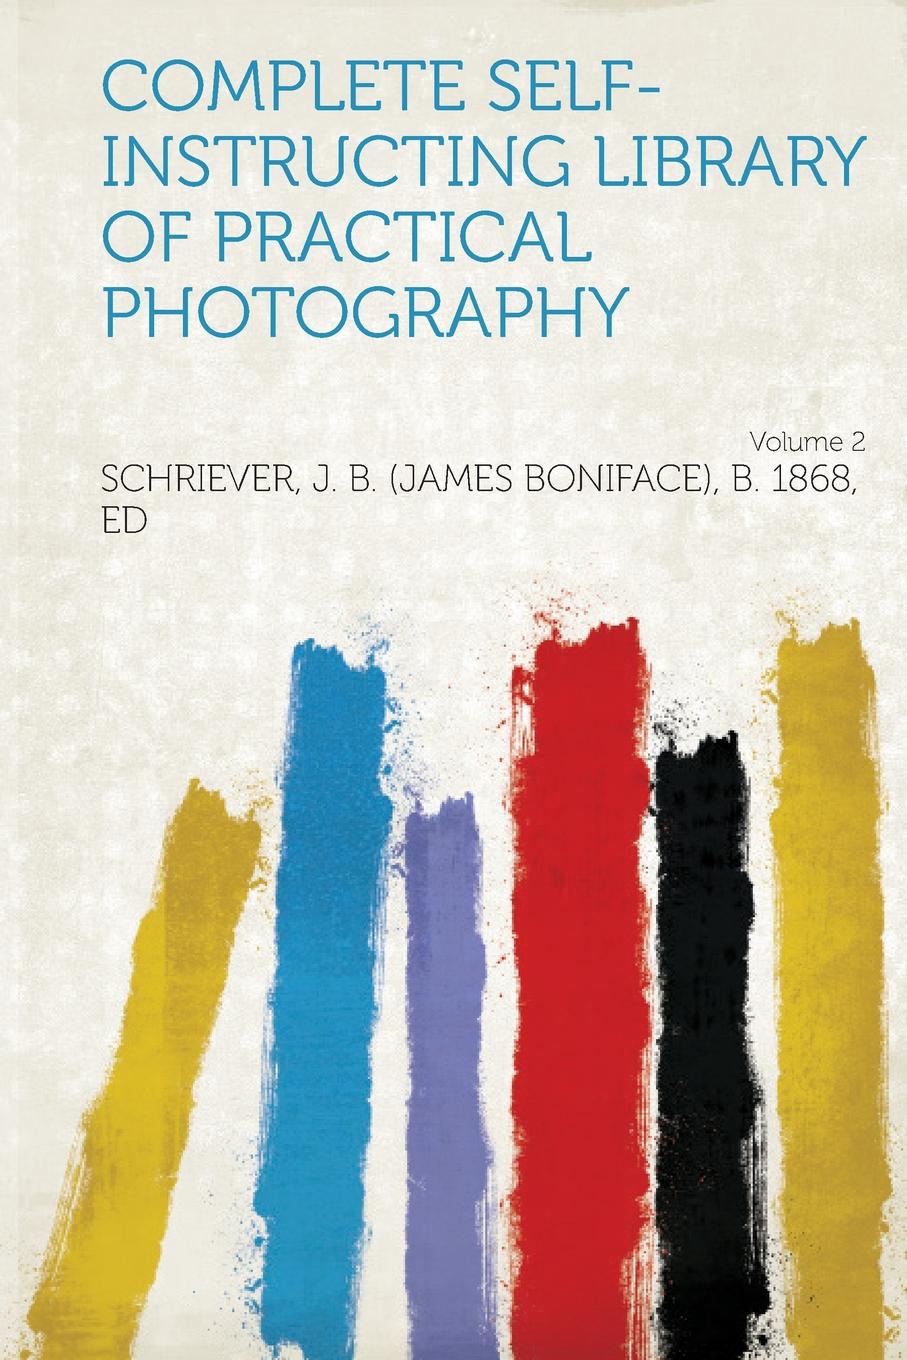 Complete Self-Instructing Library of Practical Photography Volume 2